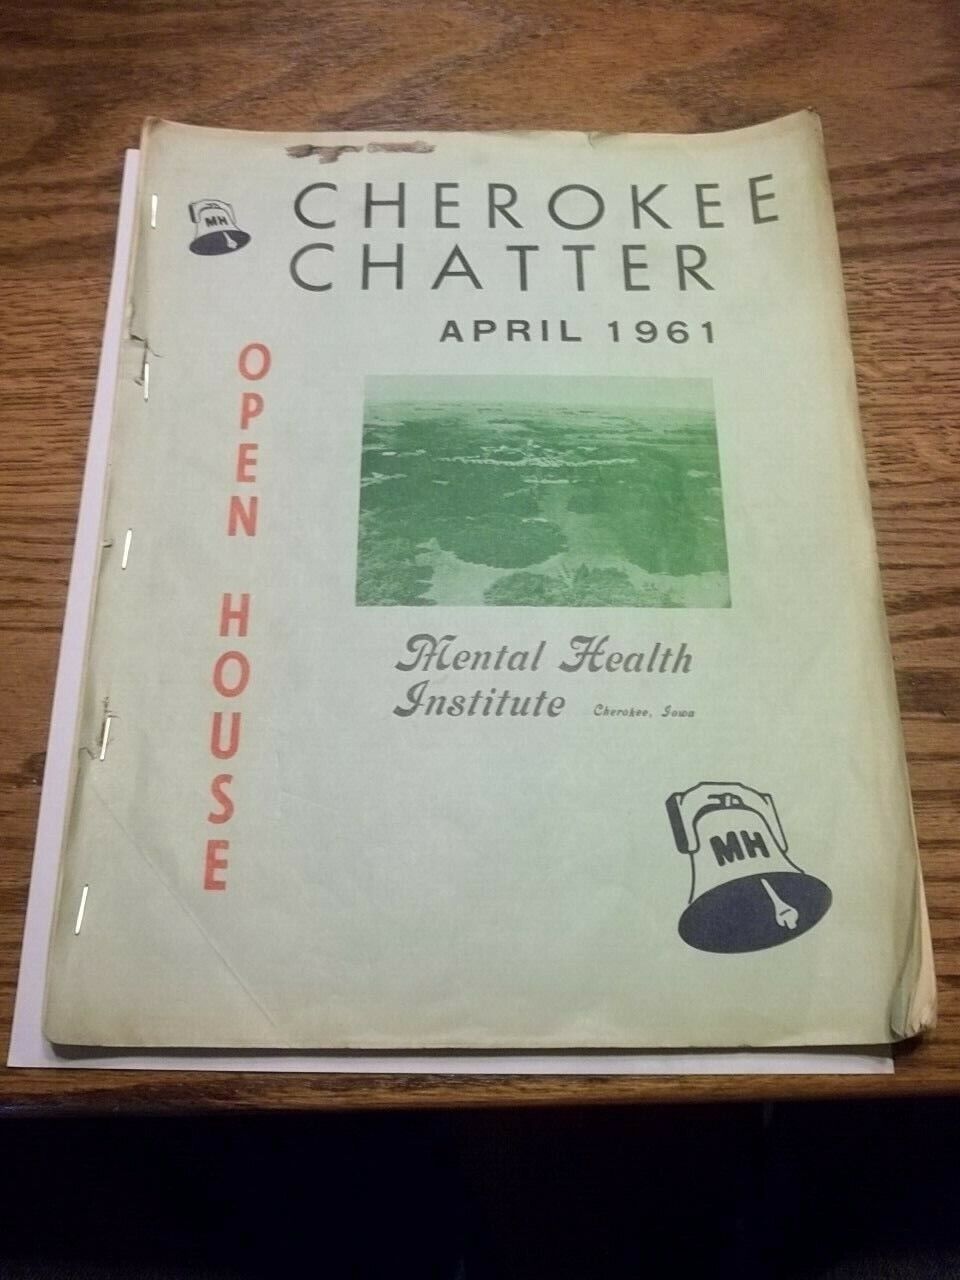 1961 April Cherokee Chatter Open House Mental Health Institute MHI Booklet Iowa